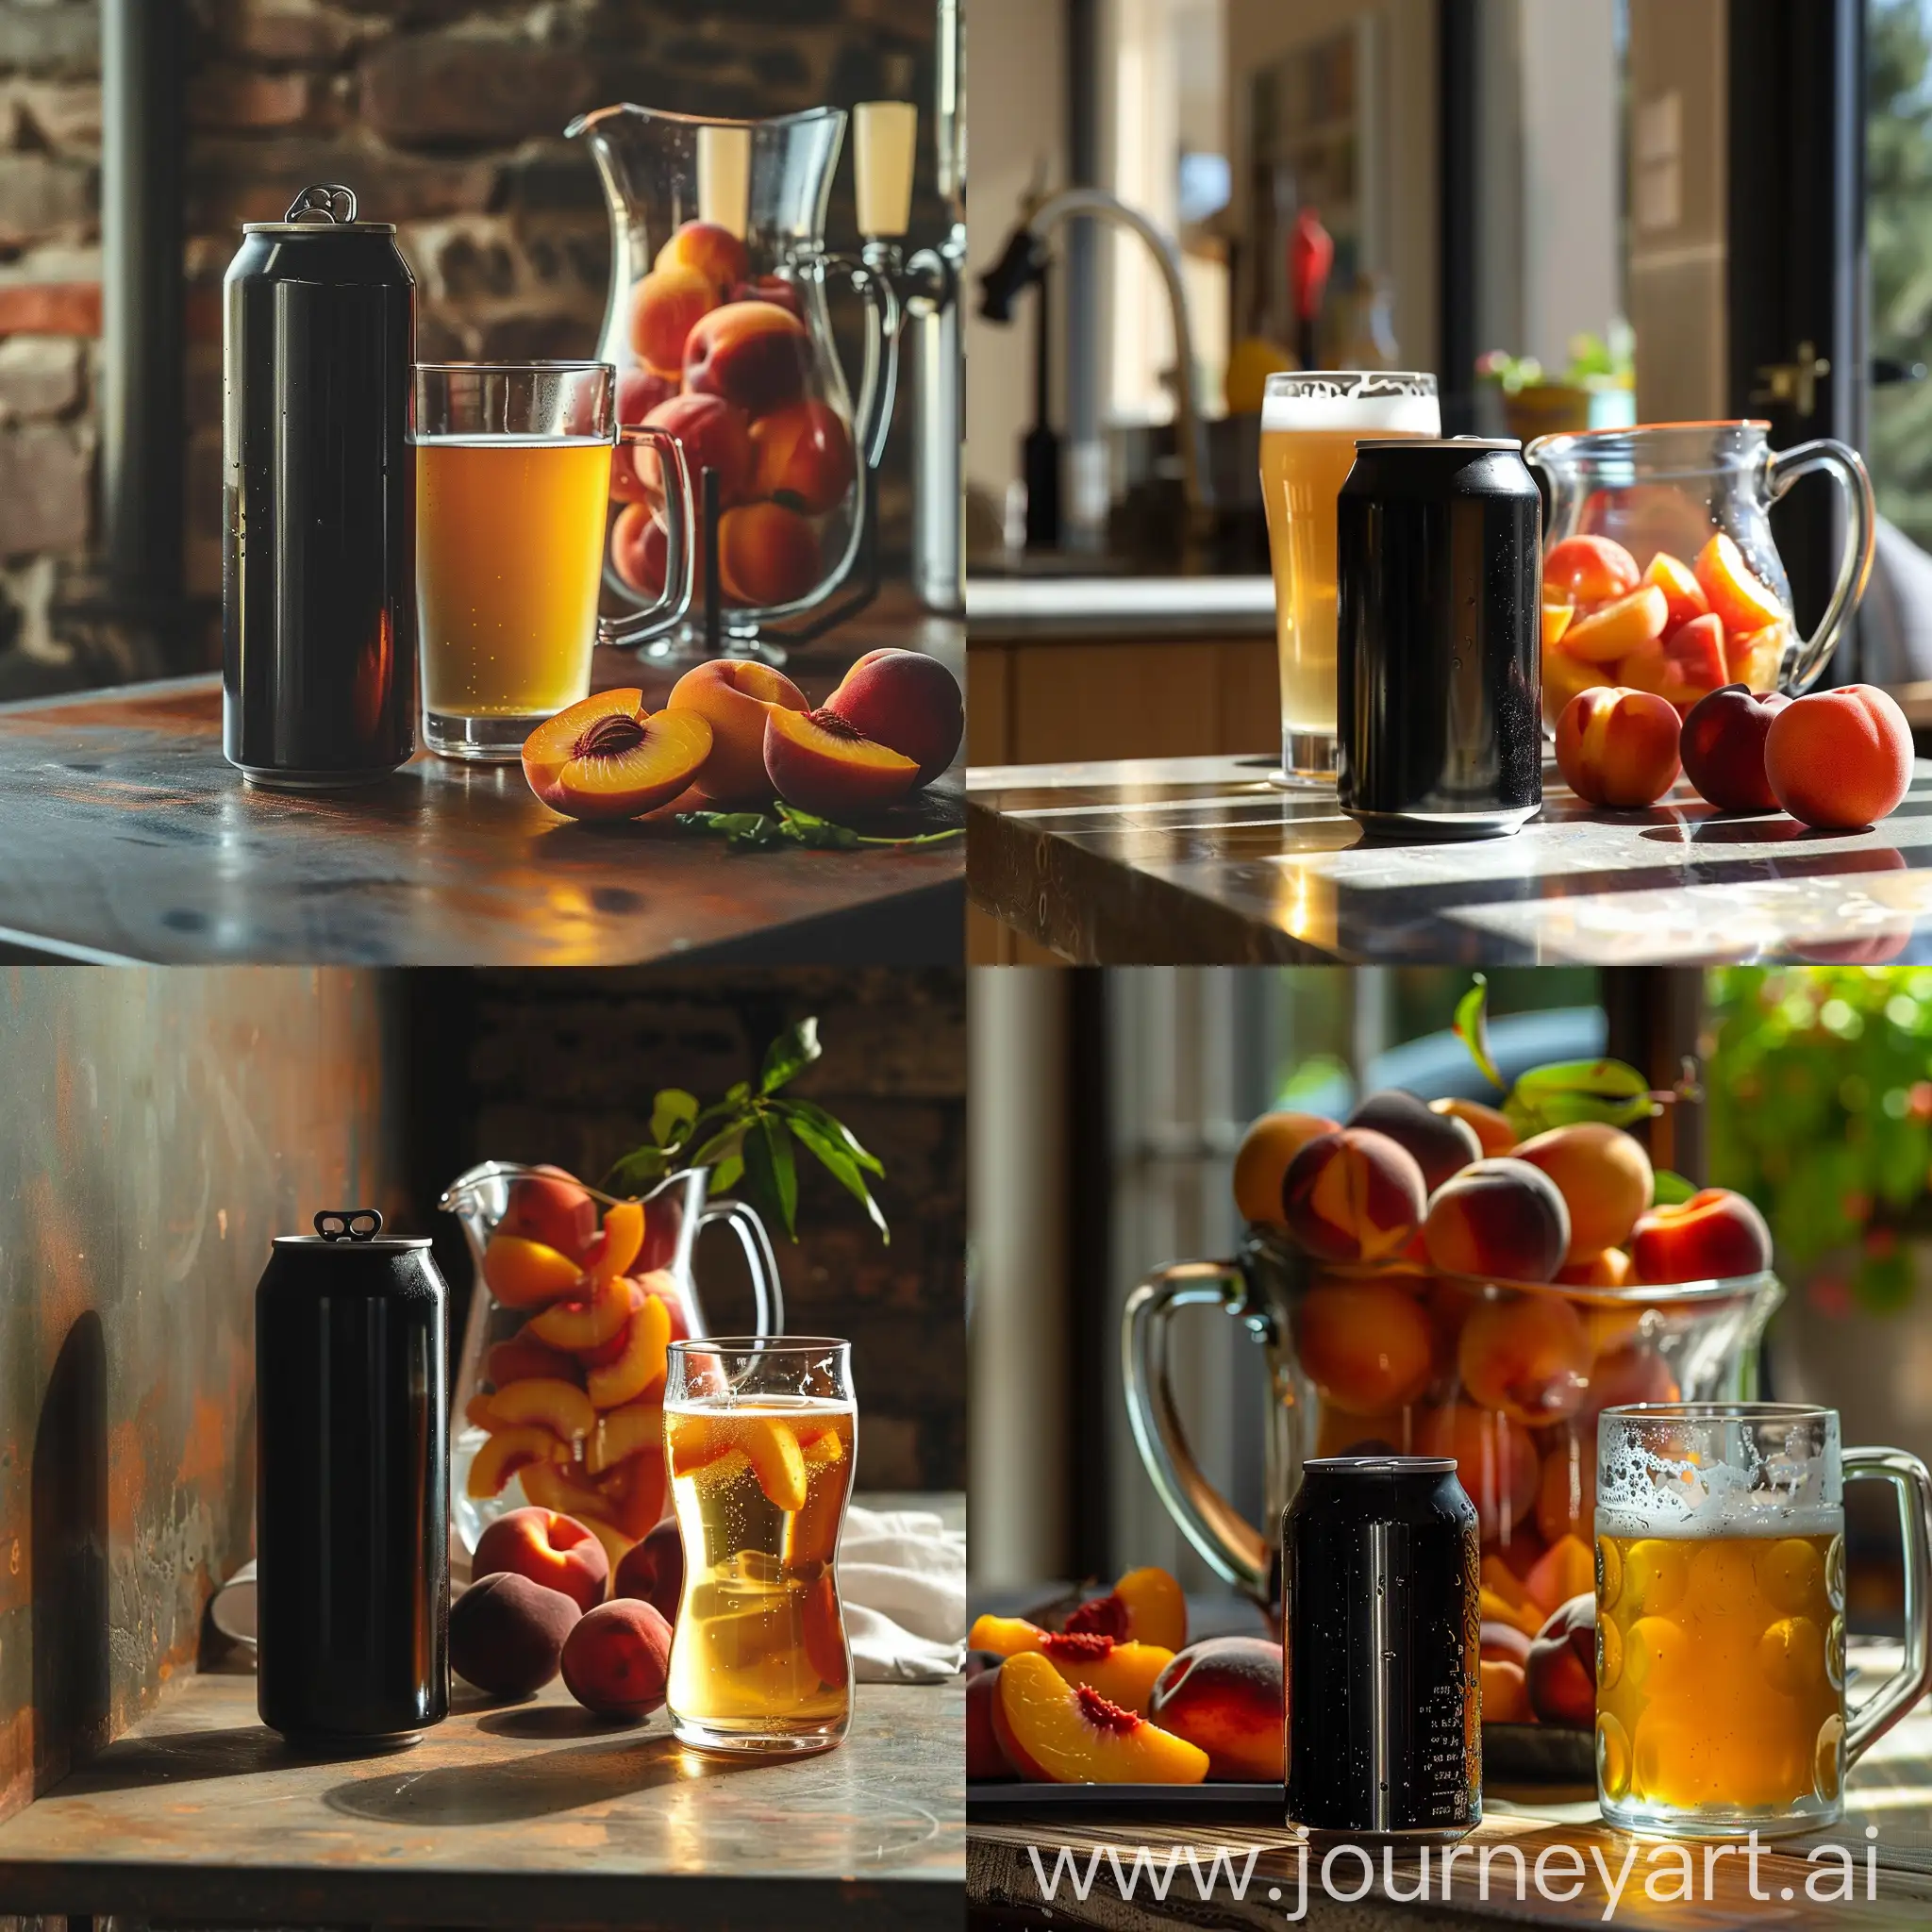 
A simple black soda can on a table and a glass of beer with a pitcher of peaches. Front view, real space